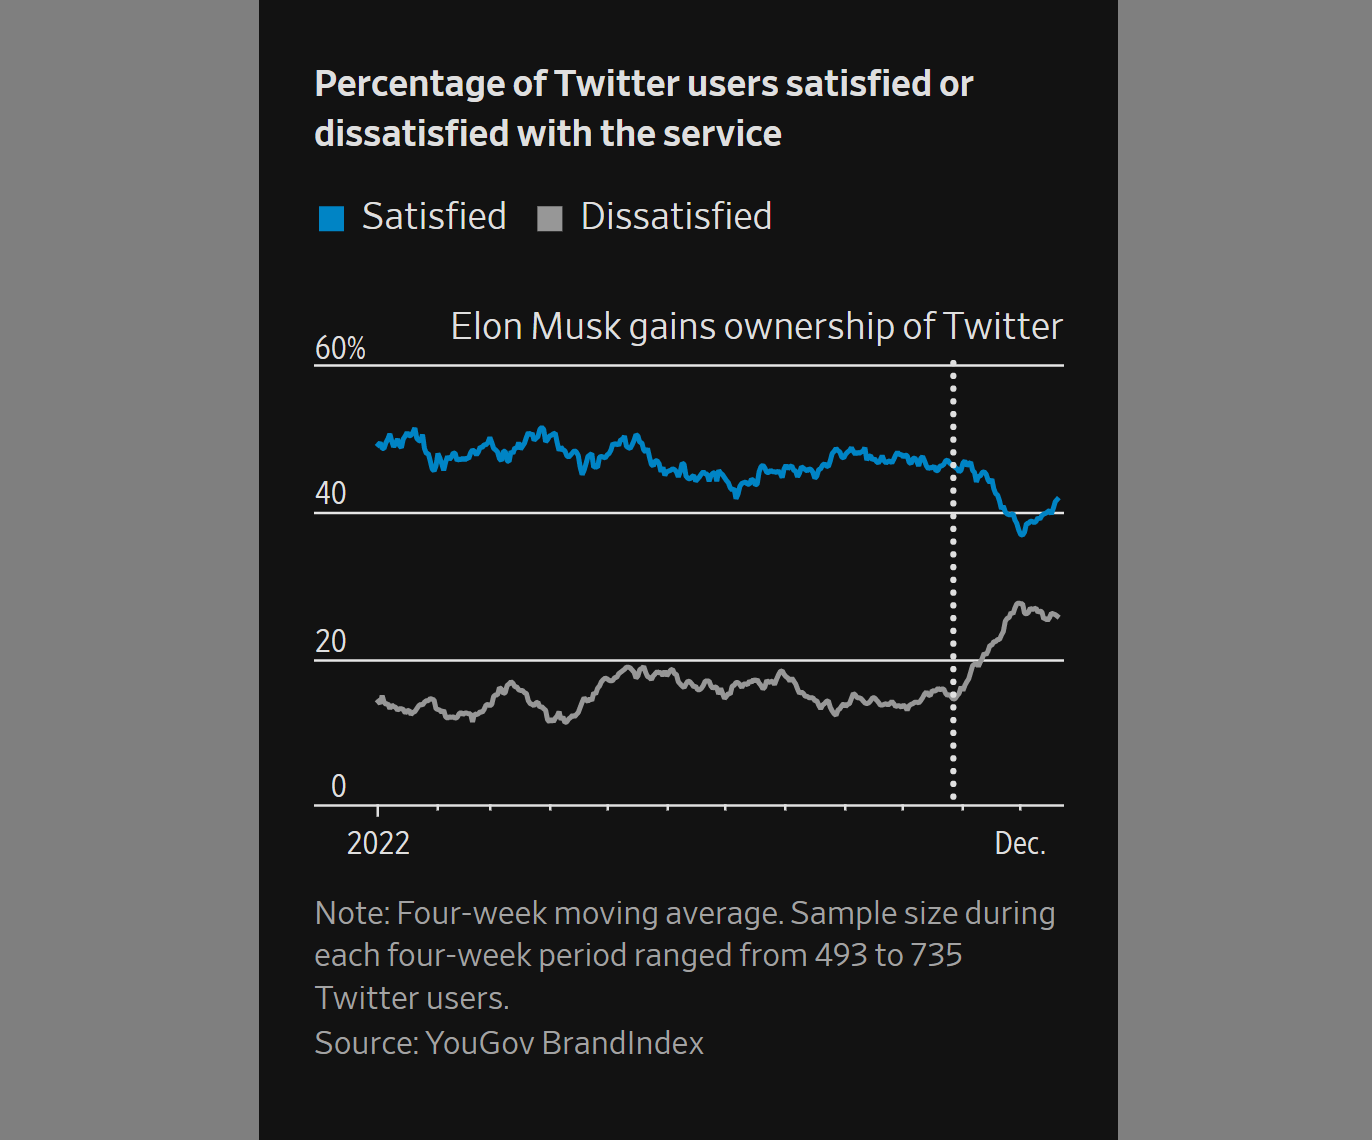 Nom : percentage-of-twitter-users-satisfied-or-dissatisfied-with-the-service.png
Affichages : 2009
Taille : 97,7 Ko